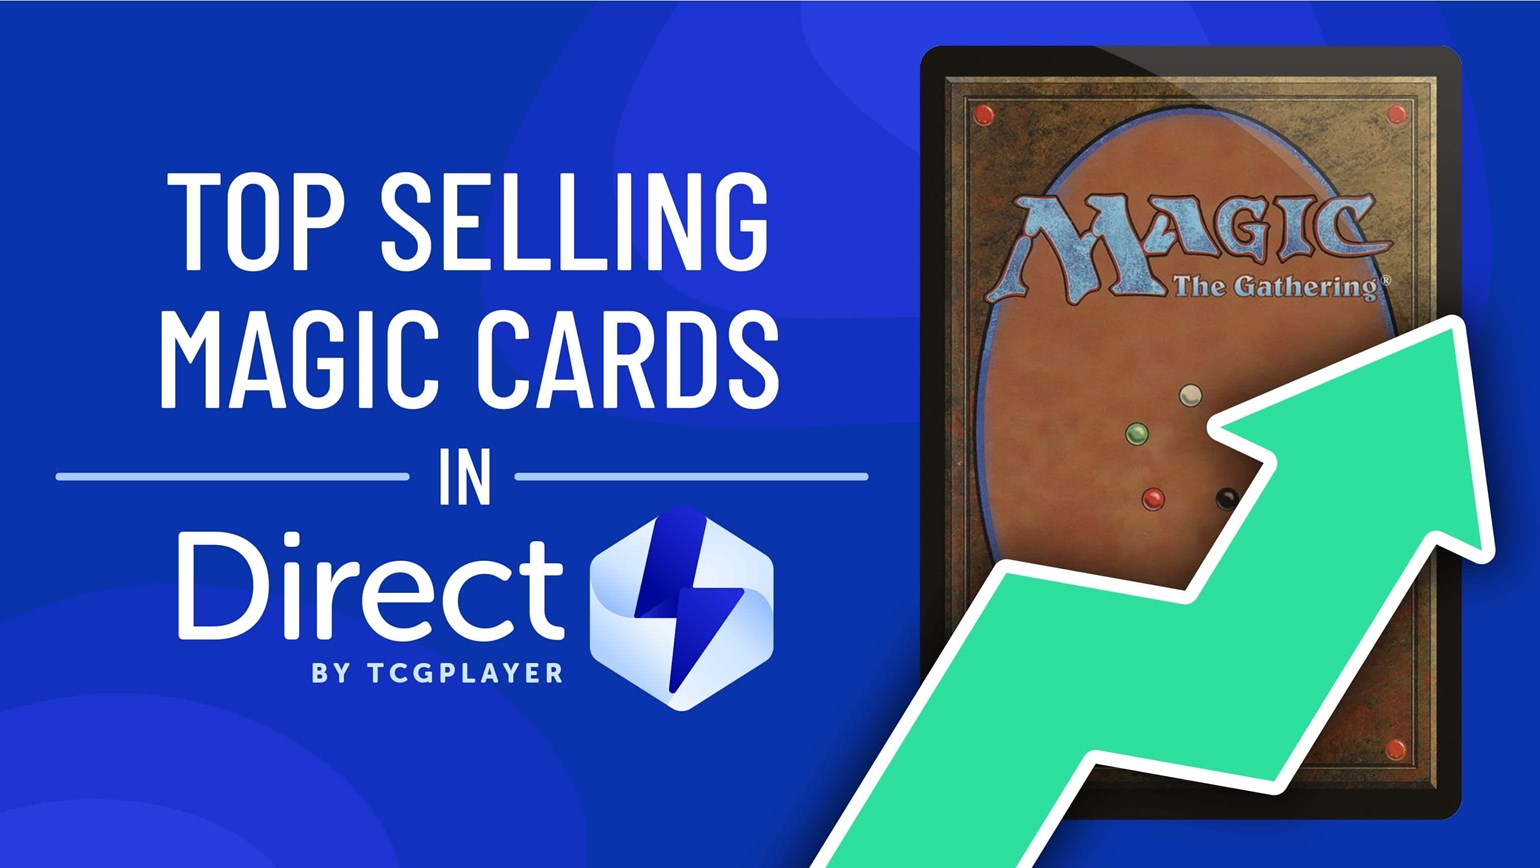 June Top Selling Magic: The Gathering Cards in Direct by TCGplayer